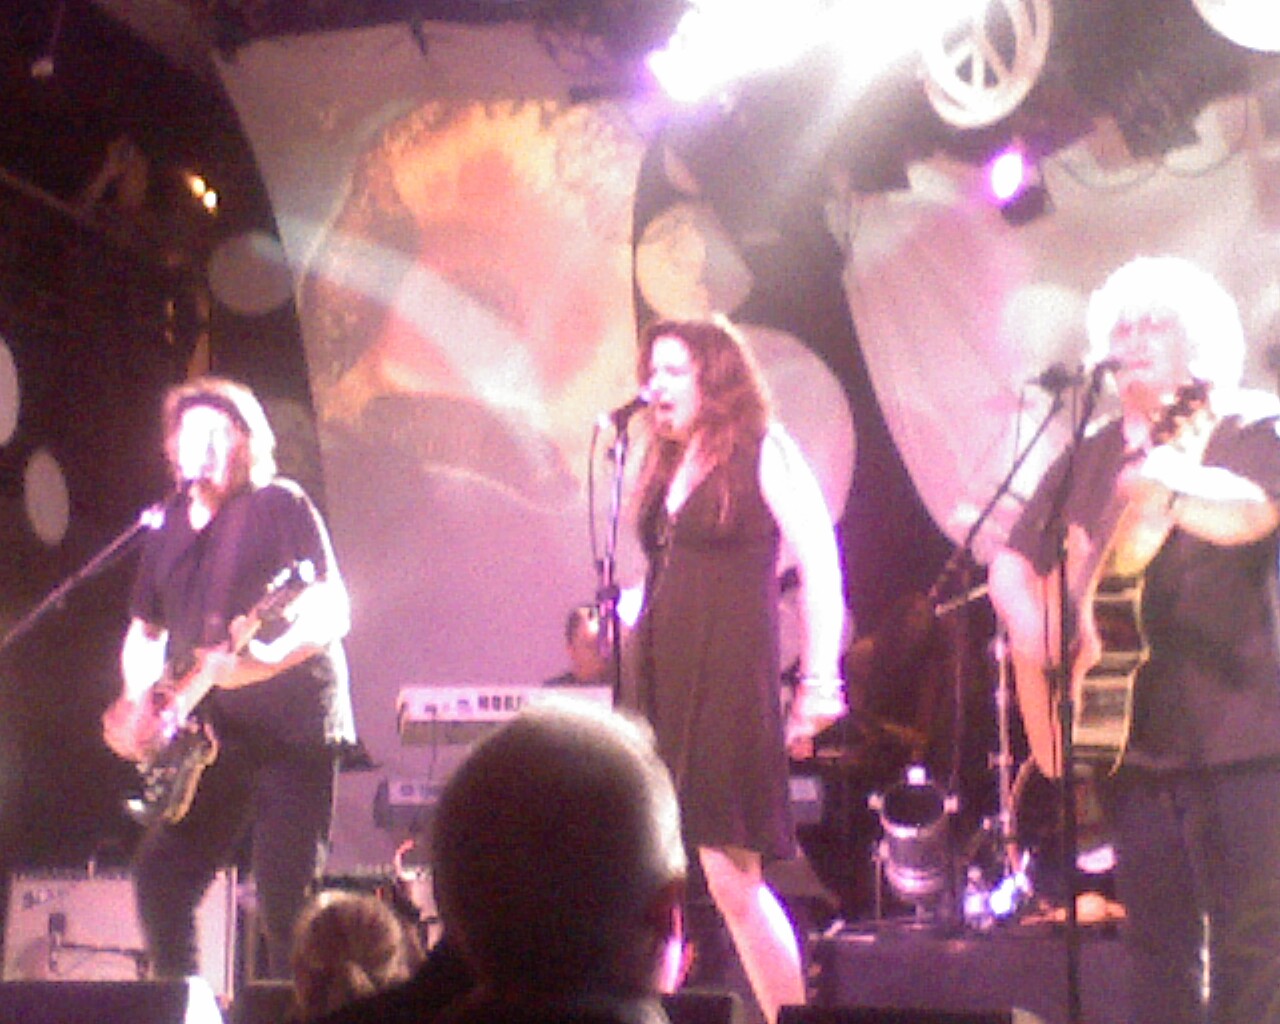 Jefferson Starship wrapped up the show